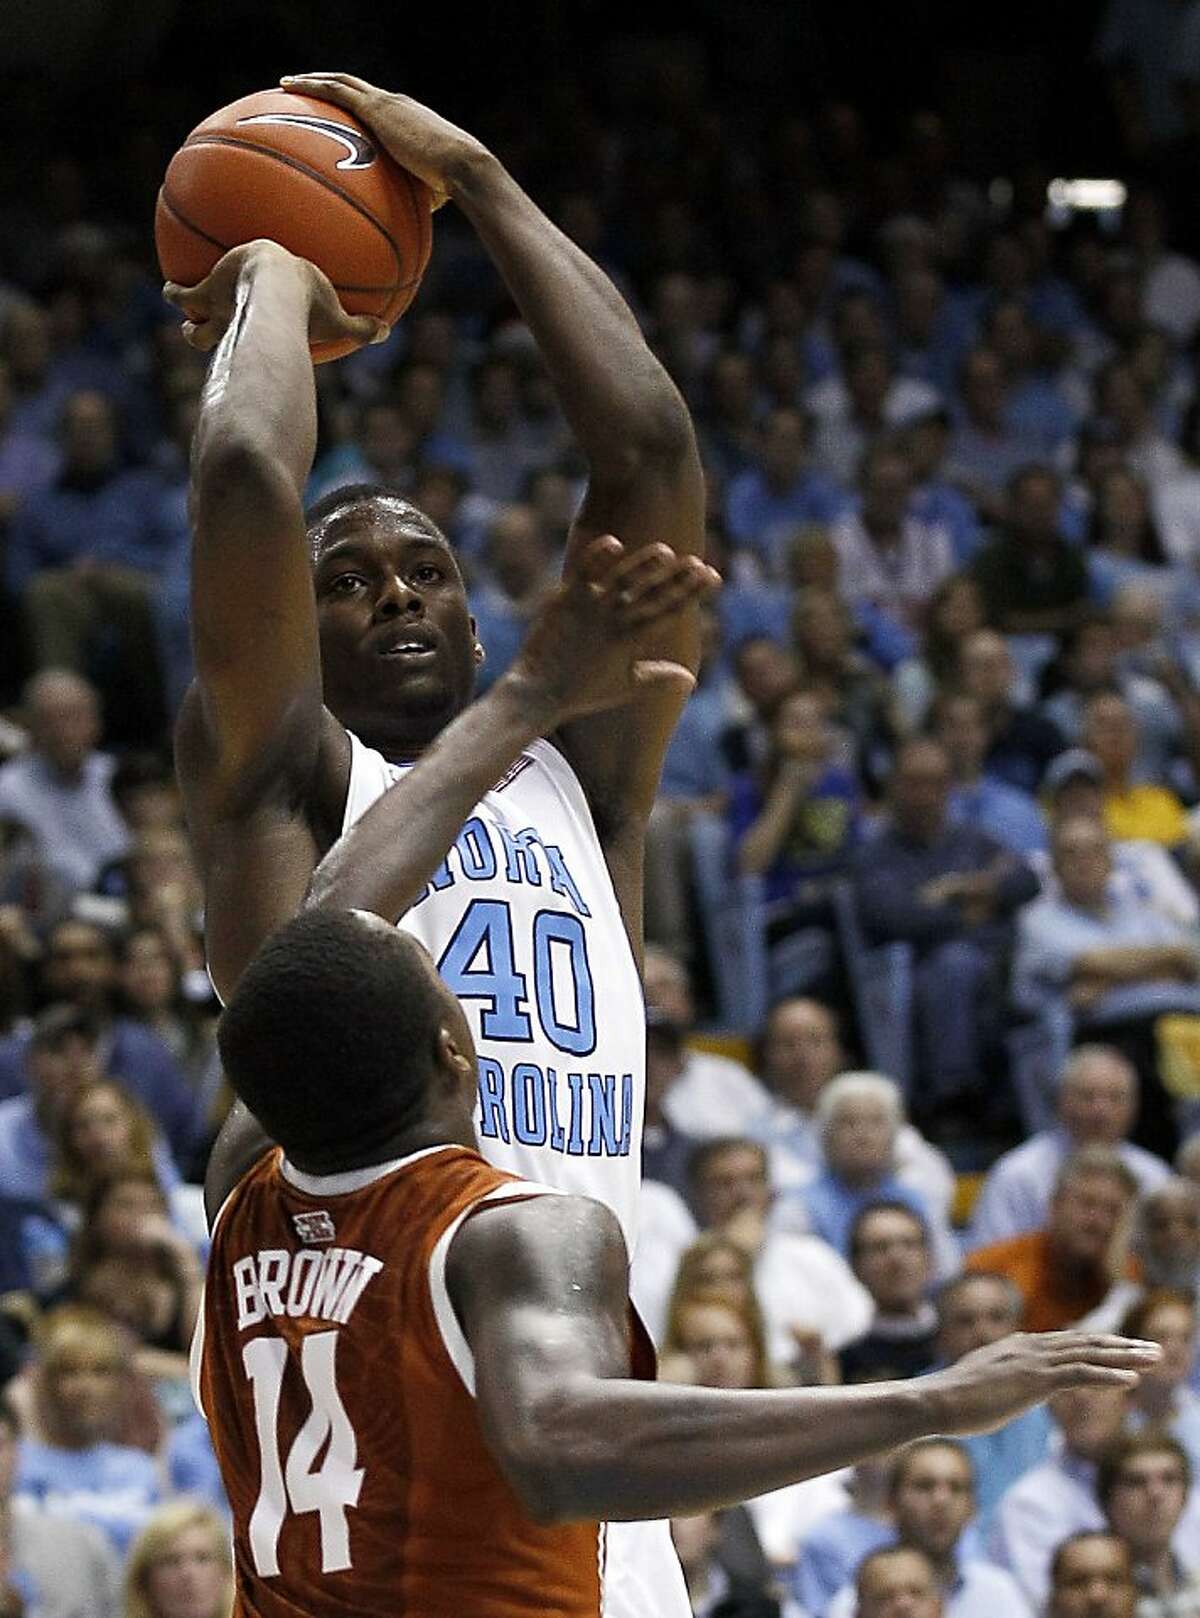 North Carolina's Harrison Barnes (40) shoots as Texas' J'Covan Brown (14) defends during the second half of an NCAA college basketball game in Chapel Hill, N.C., Wednesday, Dec. 21, 2011. North Carolina won 82-63. (AP Photo/Gerry Broome)